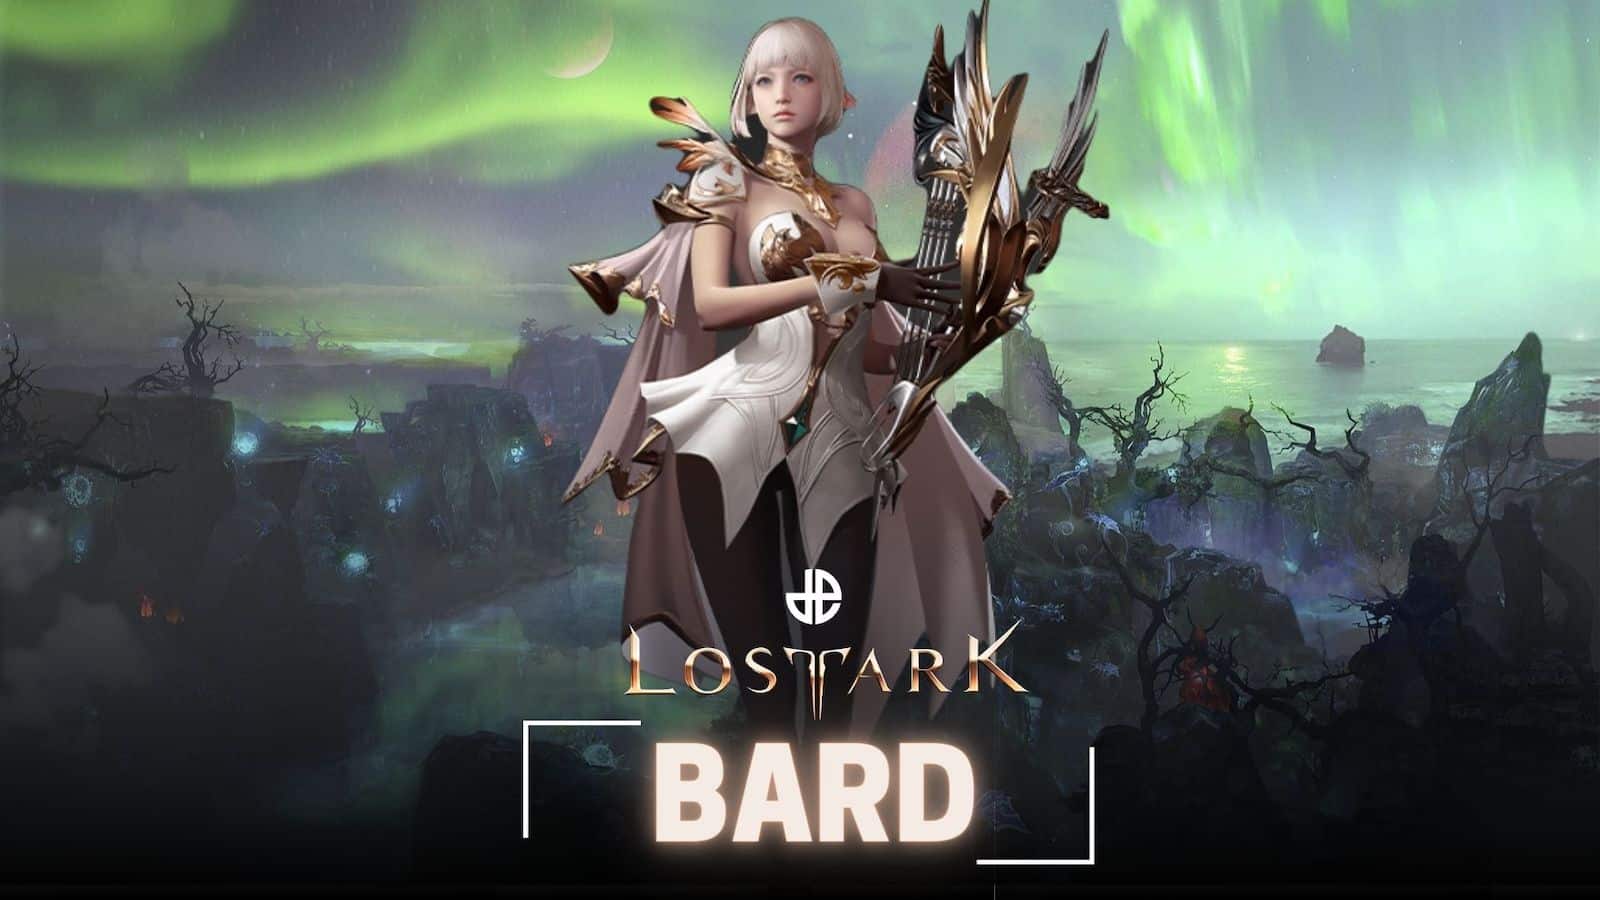 lost ark bard builds image